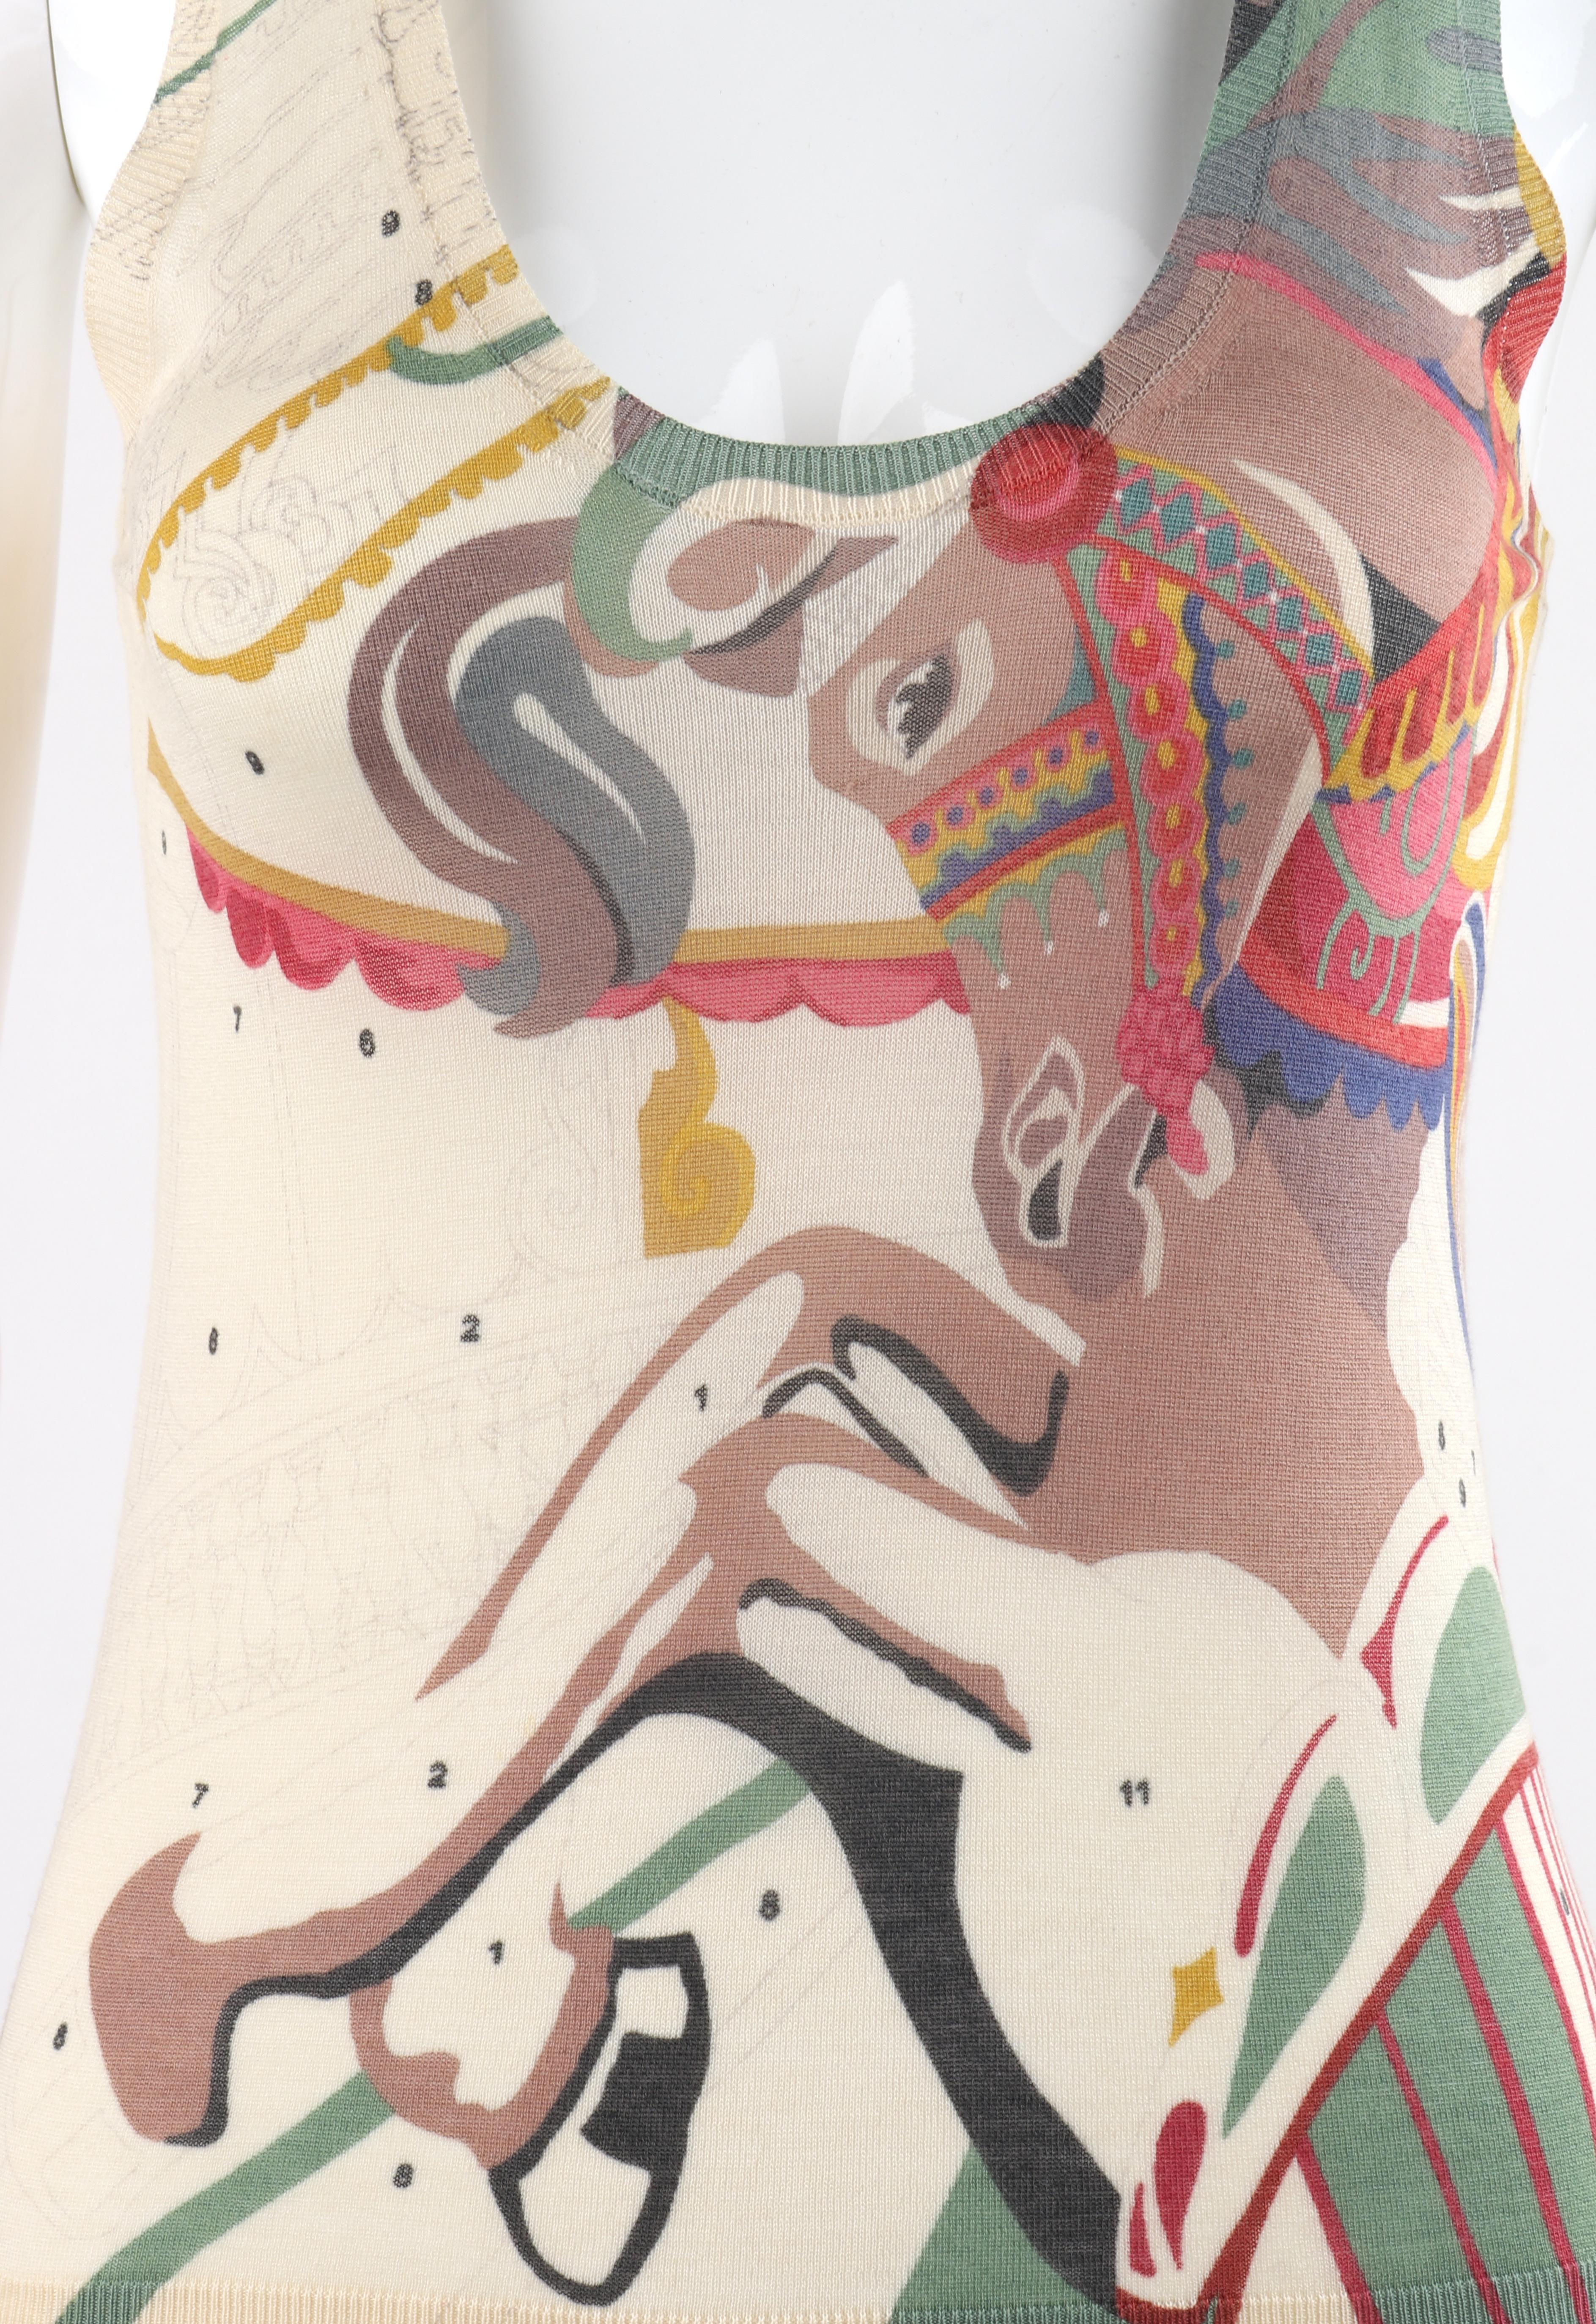 ALEXANDER McQUEEN S/S 2005 “It's Only a Game” Carousel Horse Sleeveless Knit Top 2